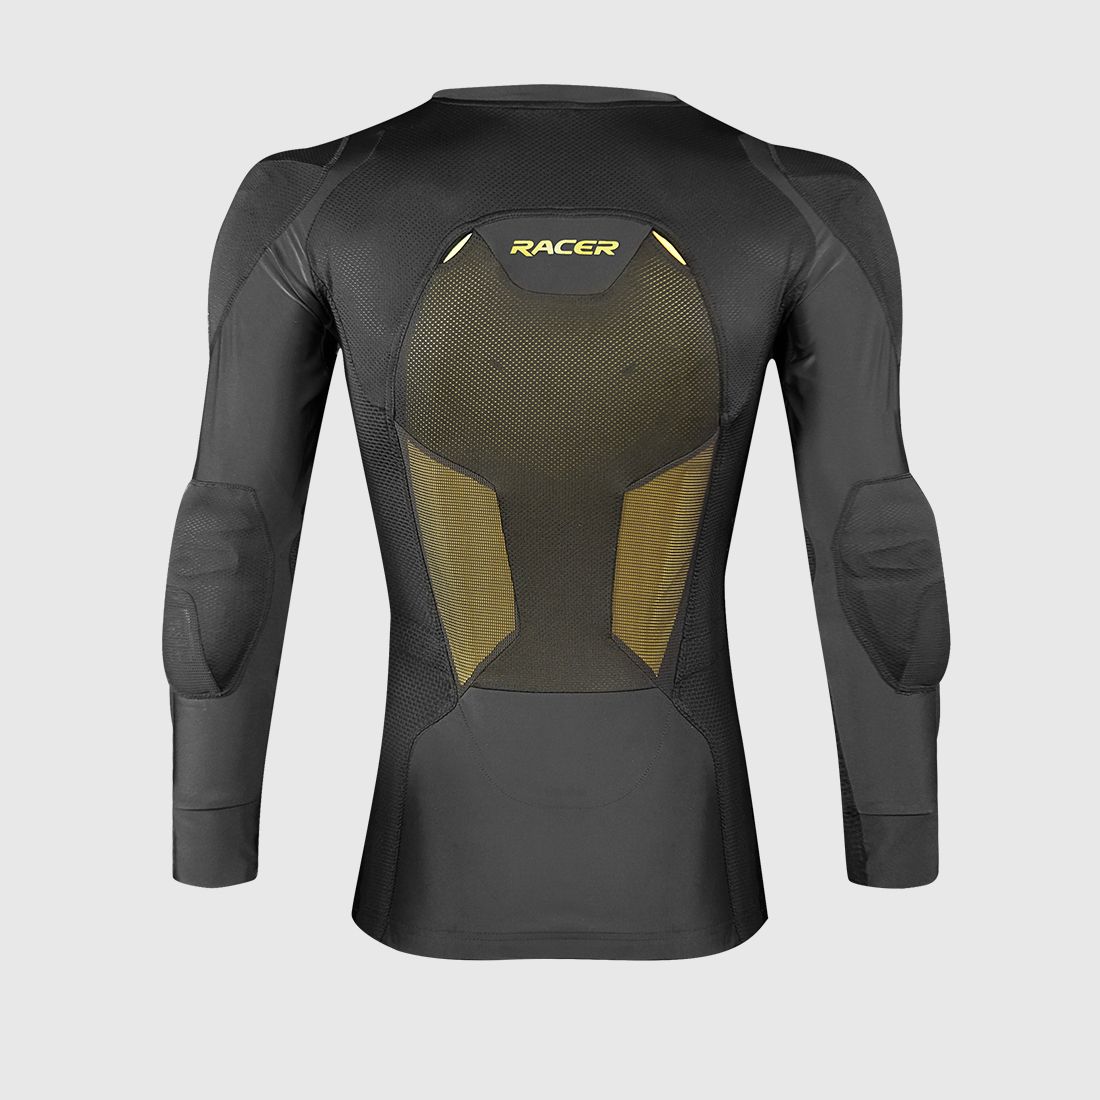 MOTION TOP KID 2 - racer protection